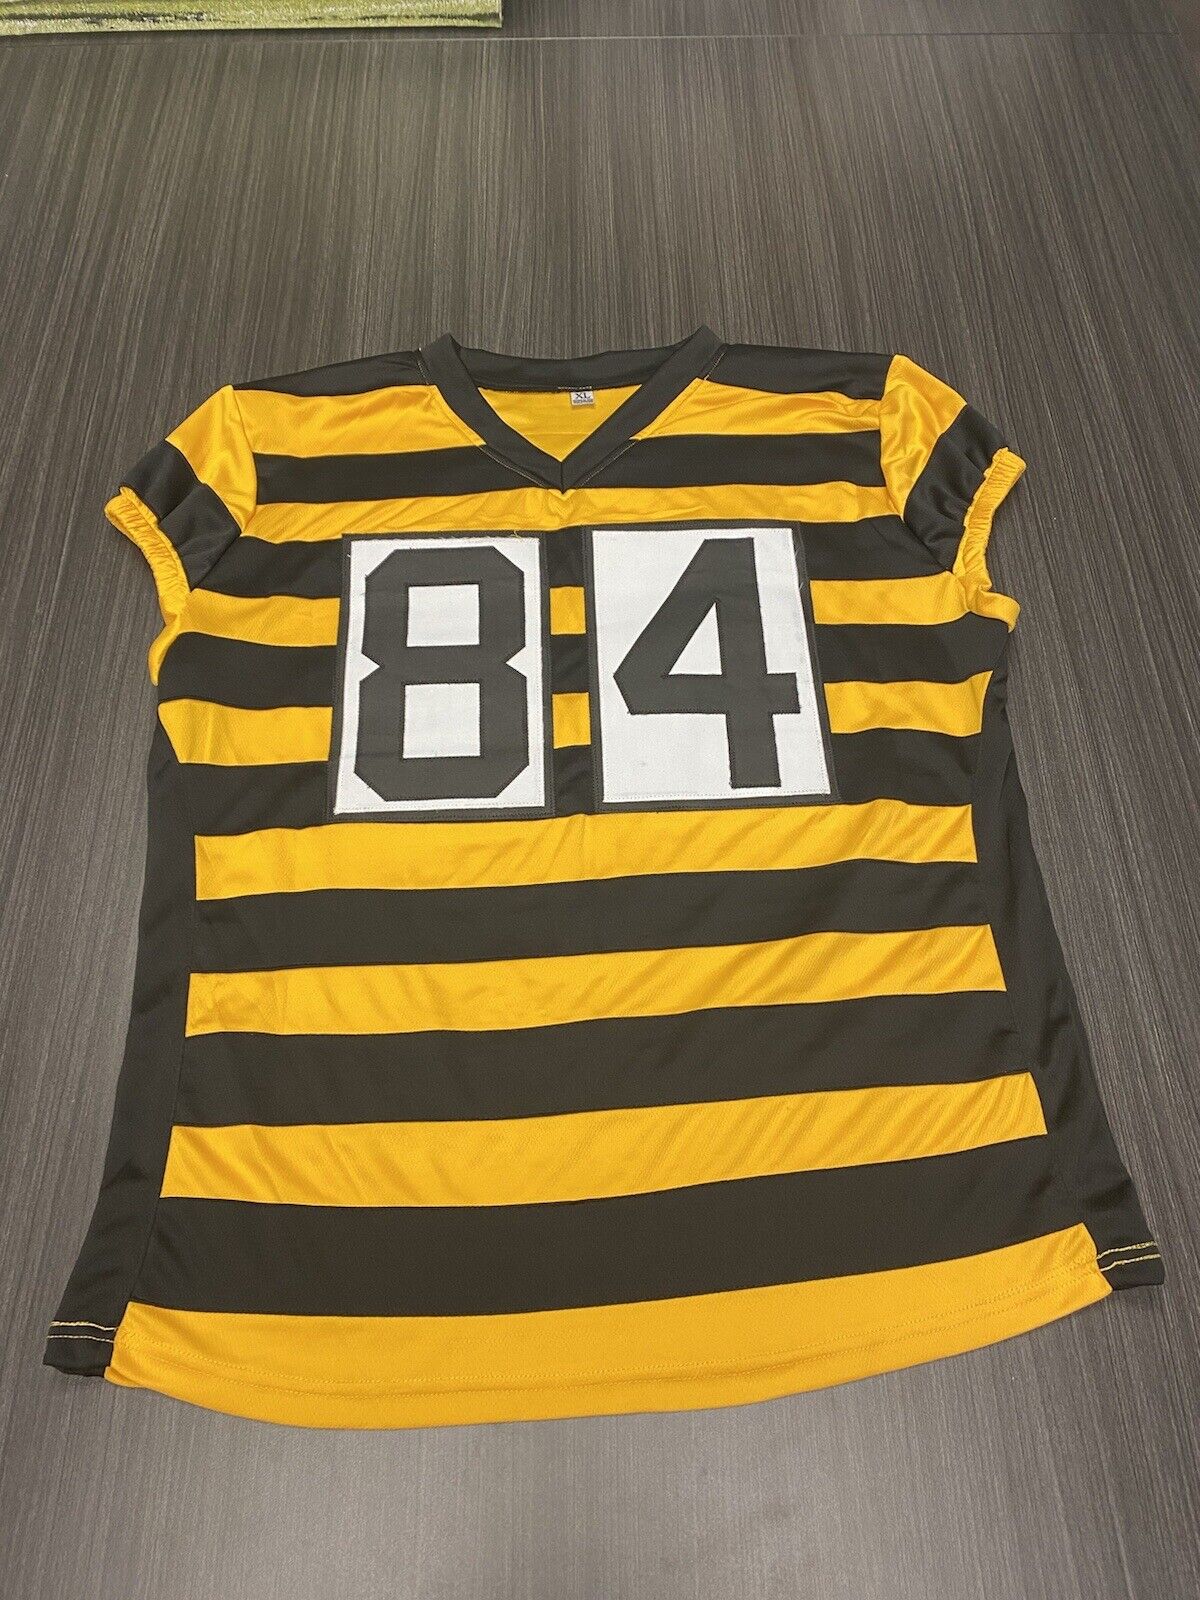 antonio brown jersey for sale